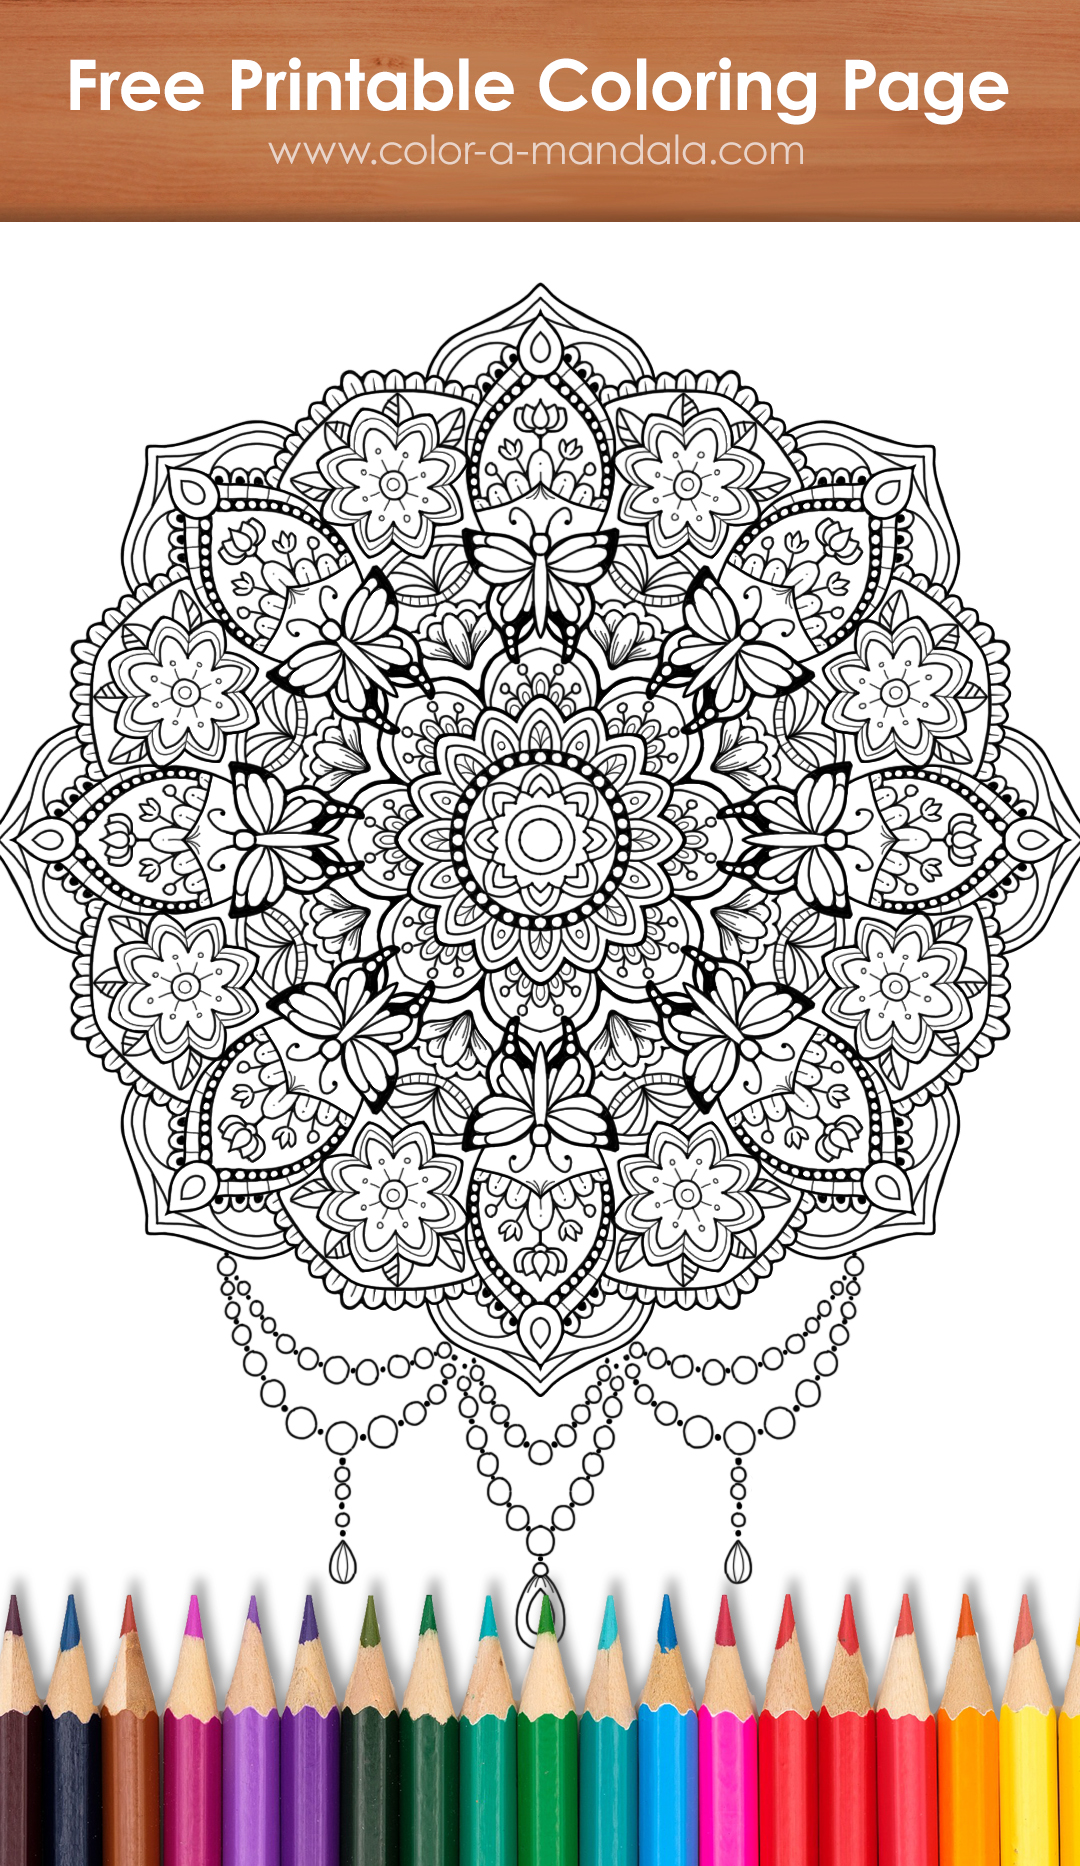 Image of an uncolored coloring page with a mandala with a circle of  butterflies and flowers.